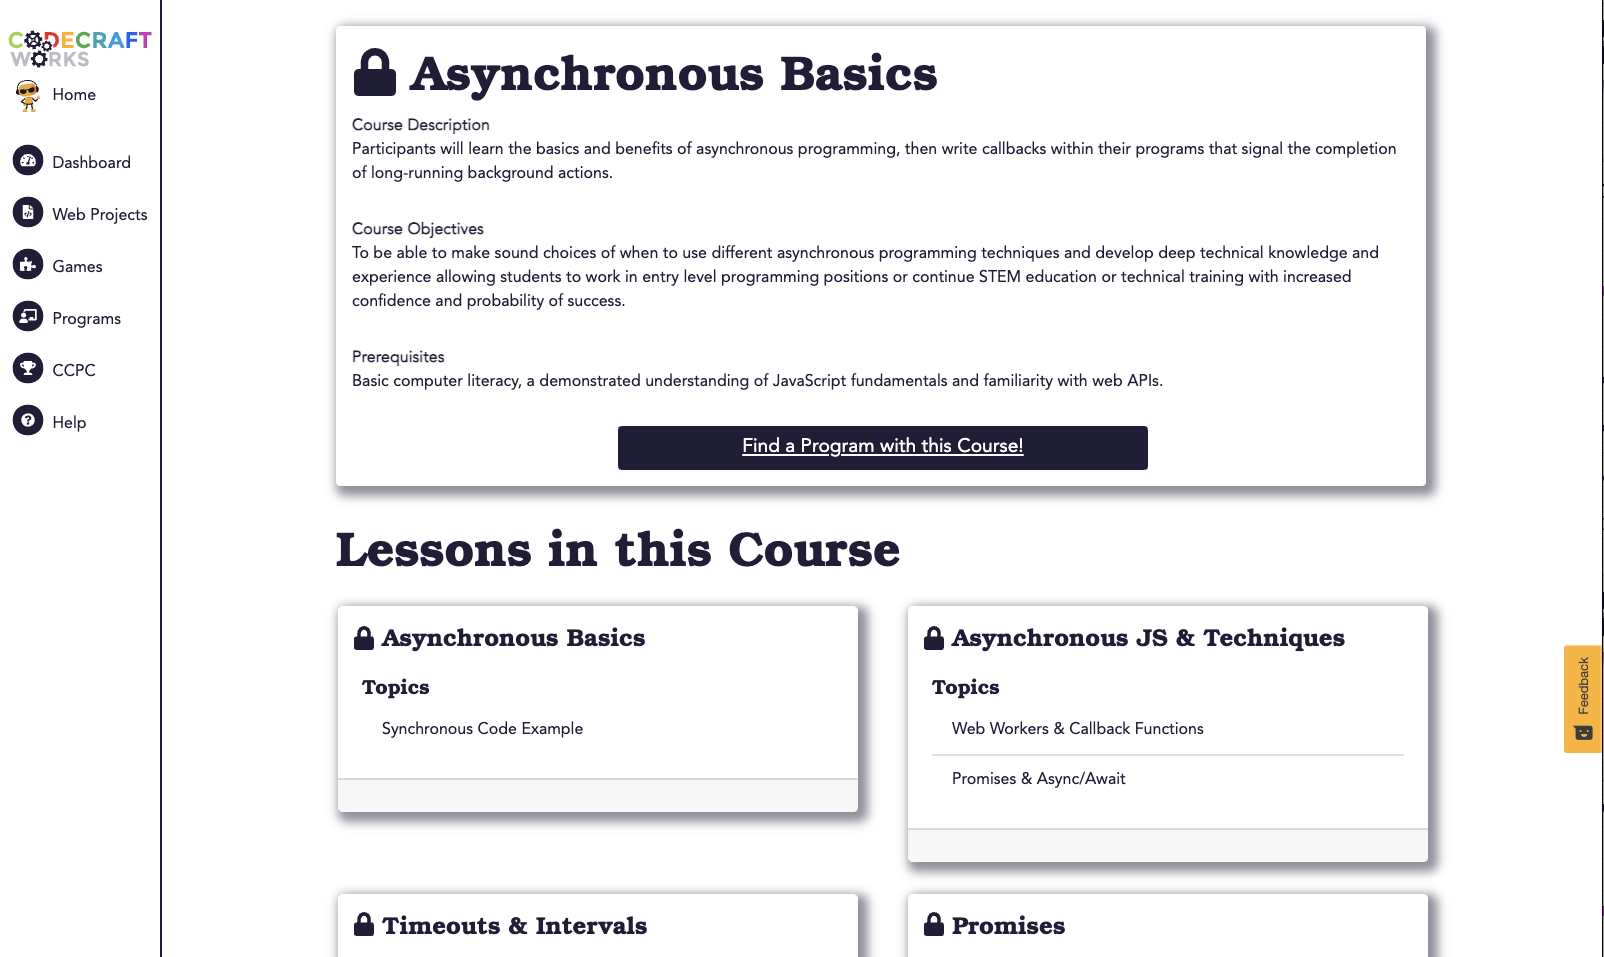 A screenshot of an online course on Asynchronous Basics. It lays out a Course Description, Course Objectives, Prerequisites, and associated Lessons in the course.